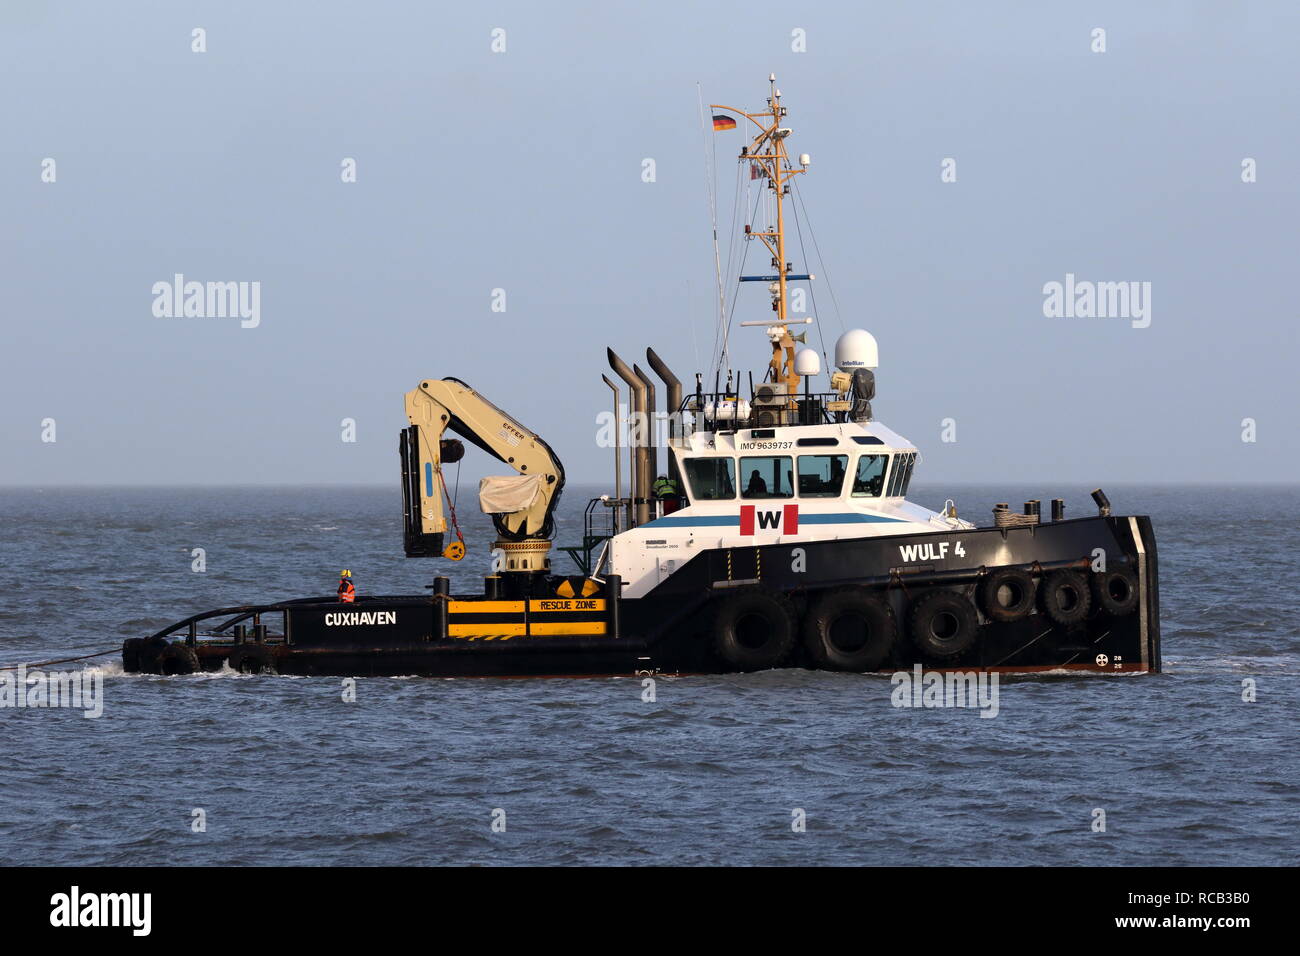 The harbor tug Wulf 4 operates on 30 December 2018 in front of the port of Cuxhaven on the Elbe. Stock Photo